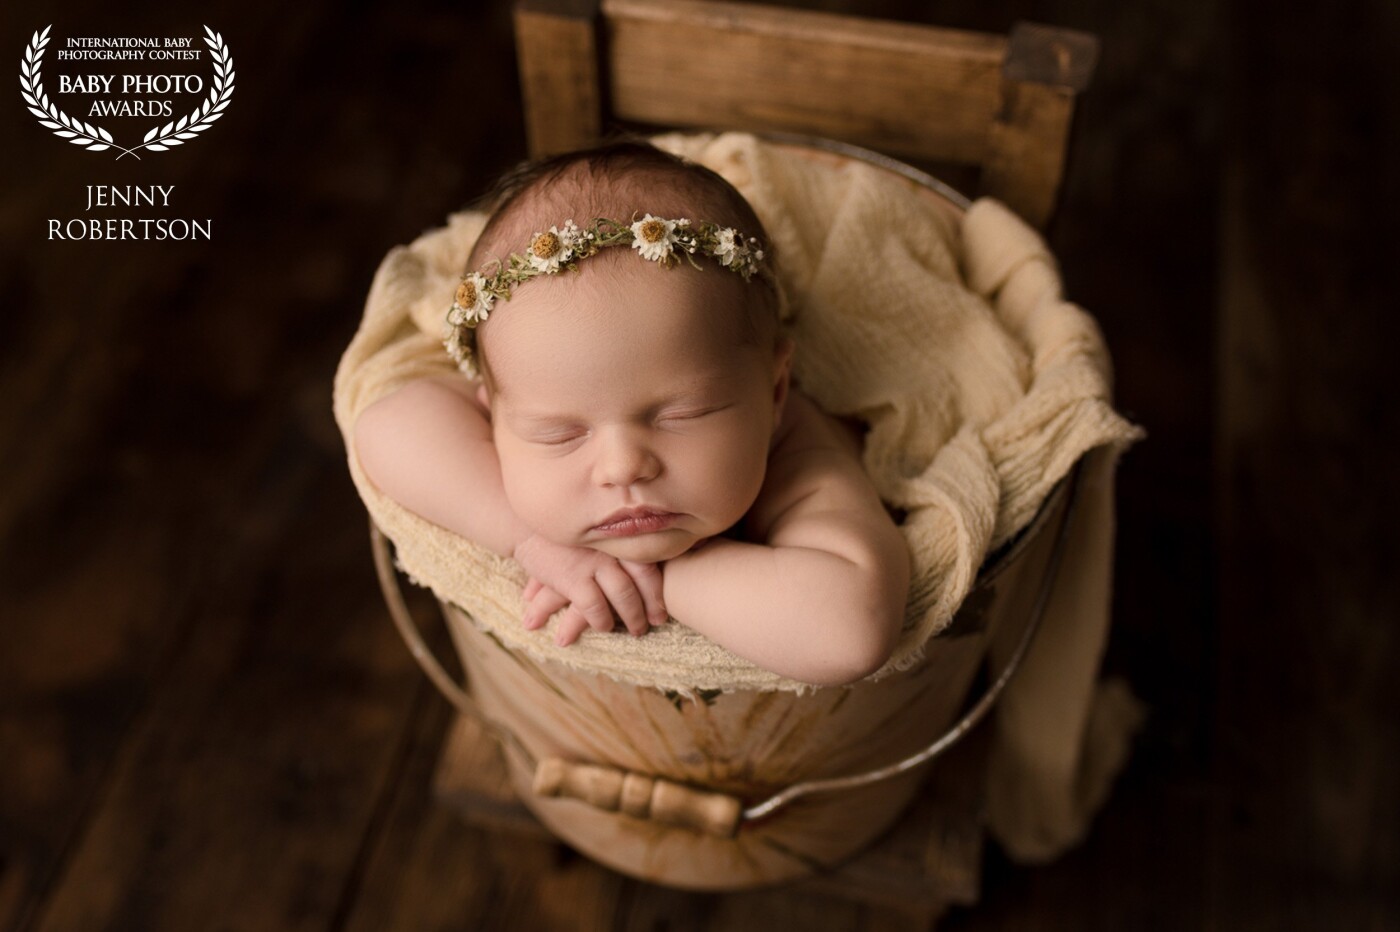 This was my first baby of the New Year to photograph on January 1 and it was a perfect way to start 2021! Bucket pose is one of my favorites!